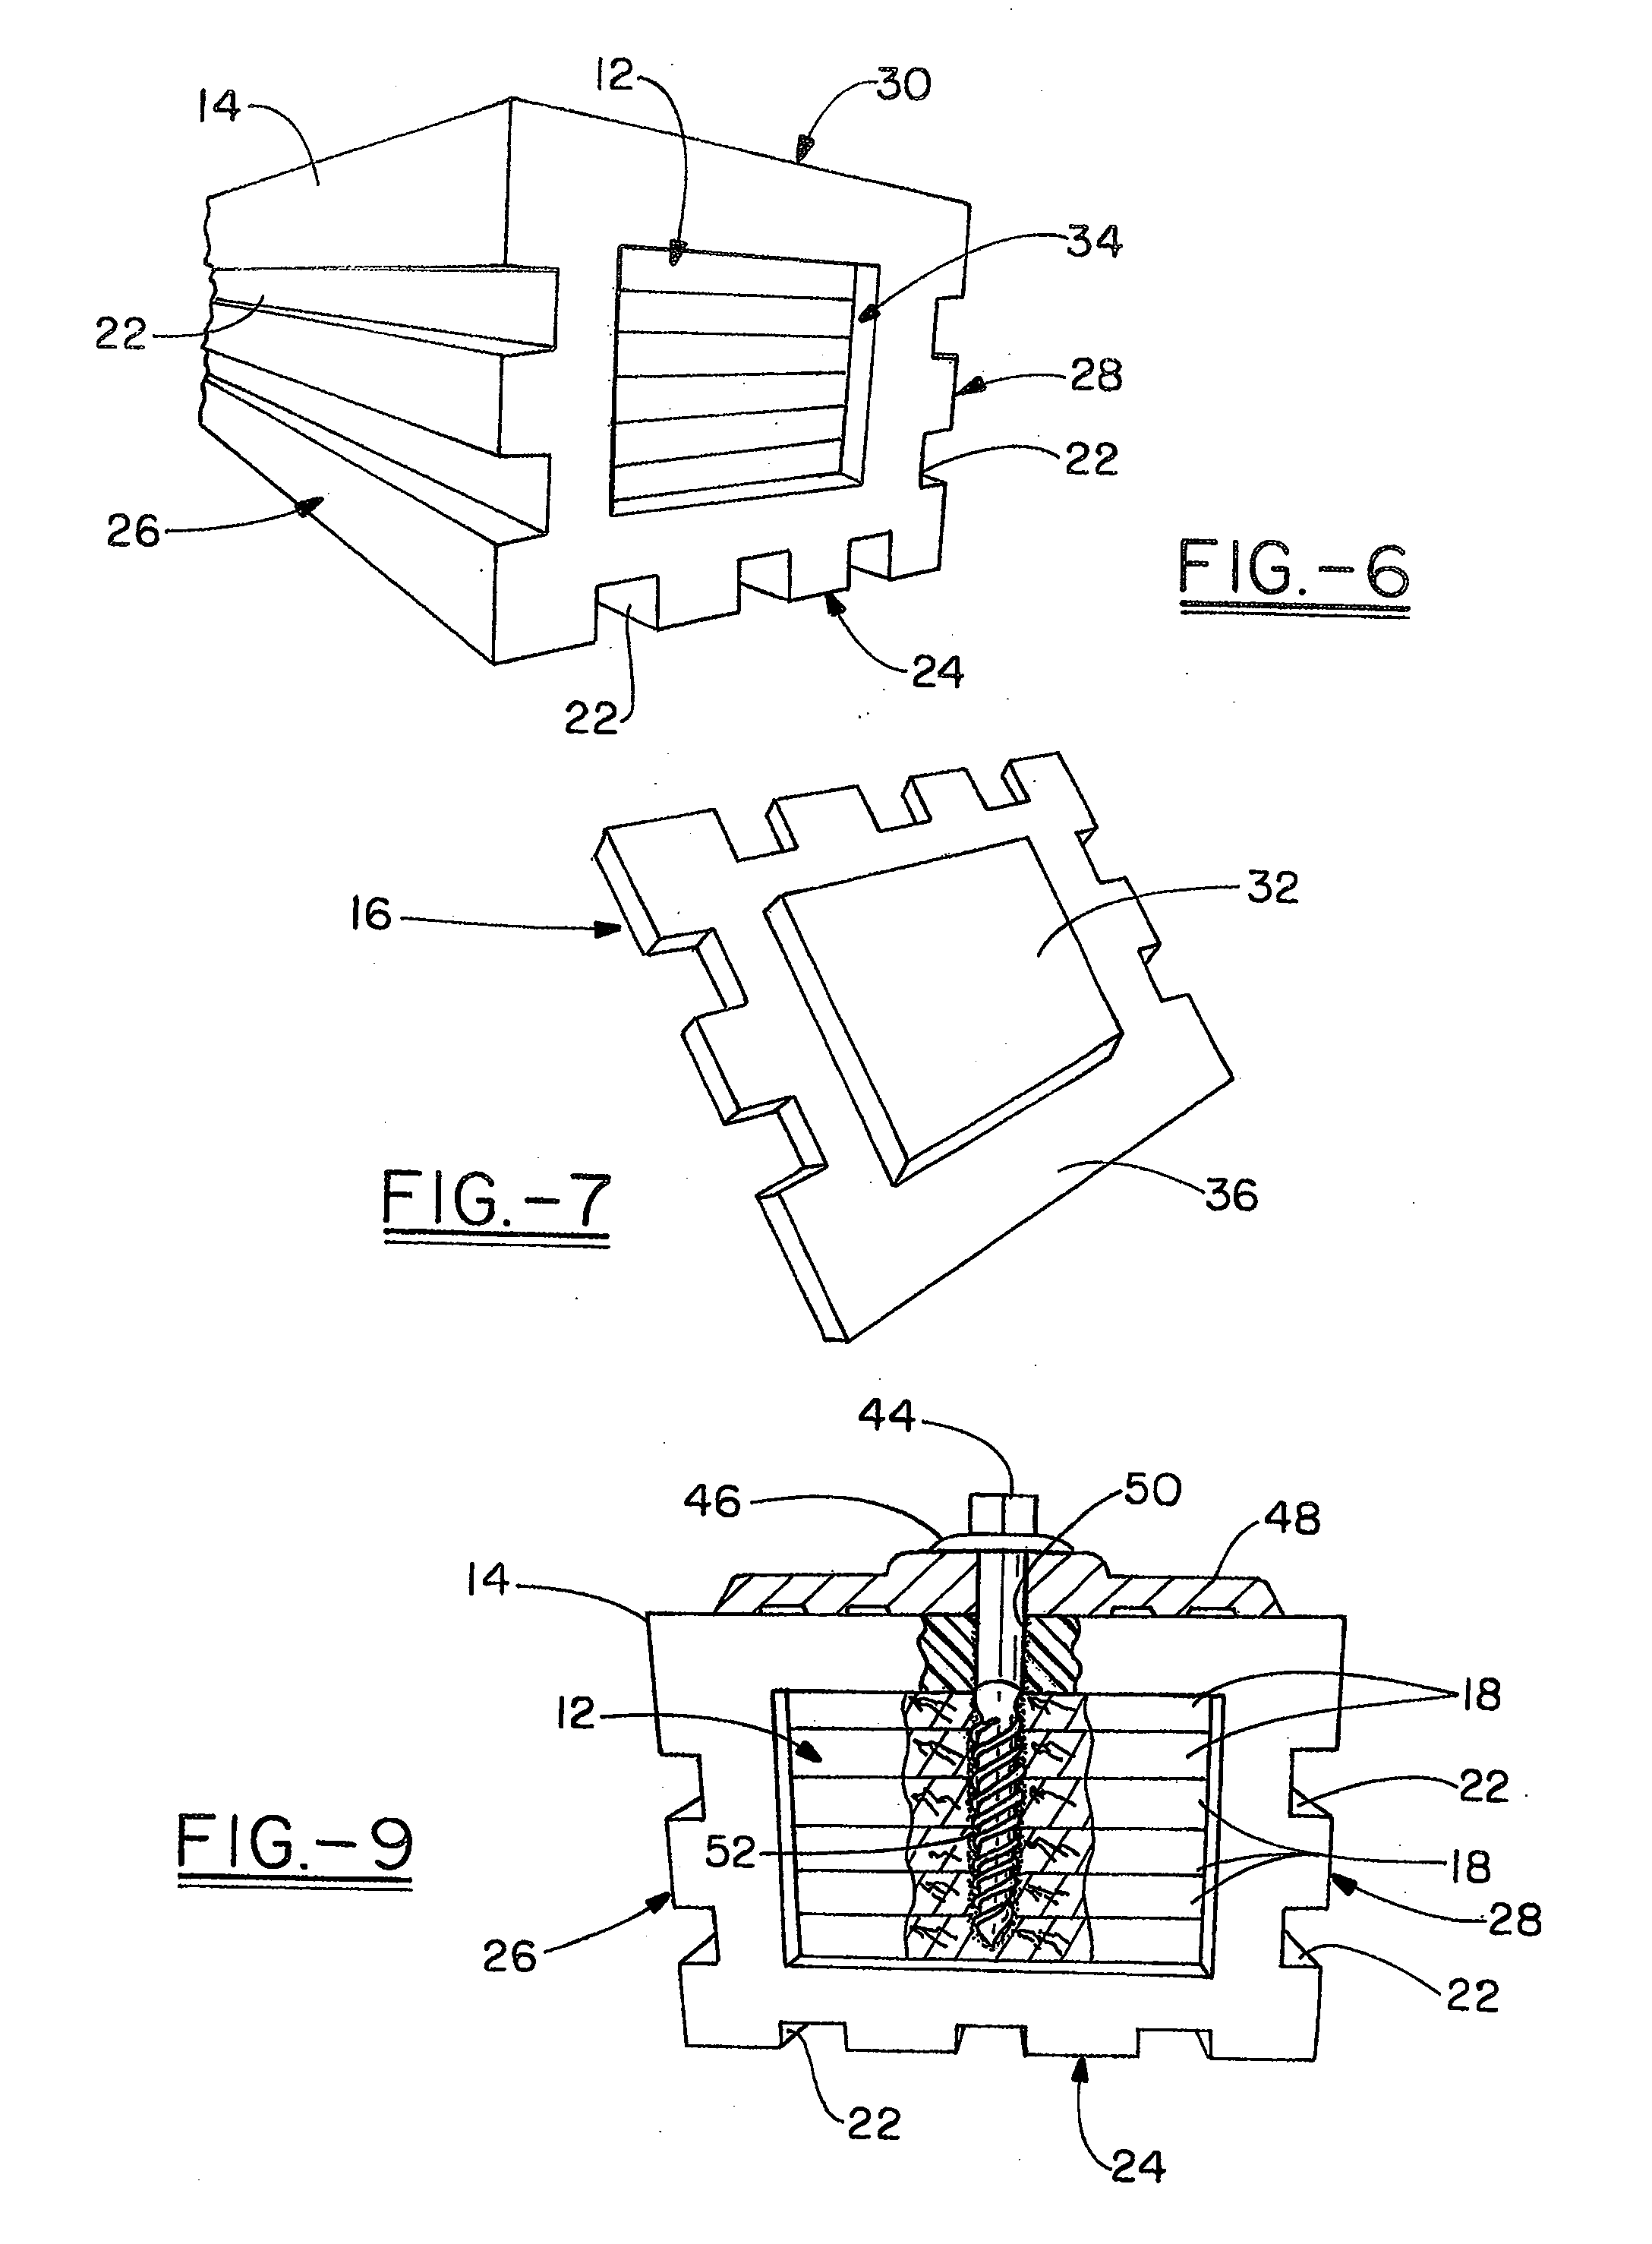 Structure for railroad ties having data acquisition, processing and transmission means